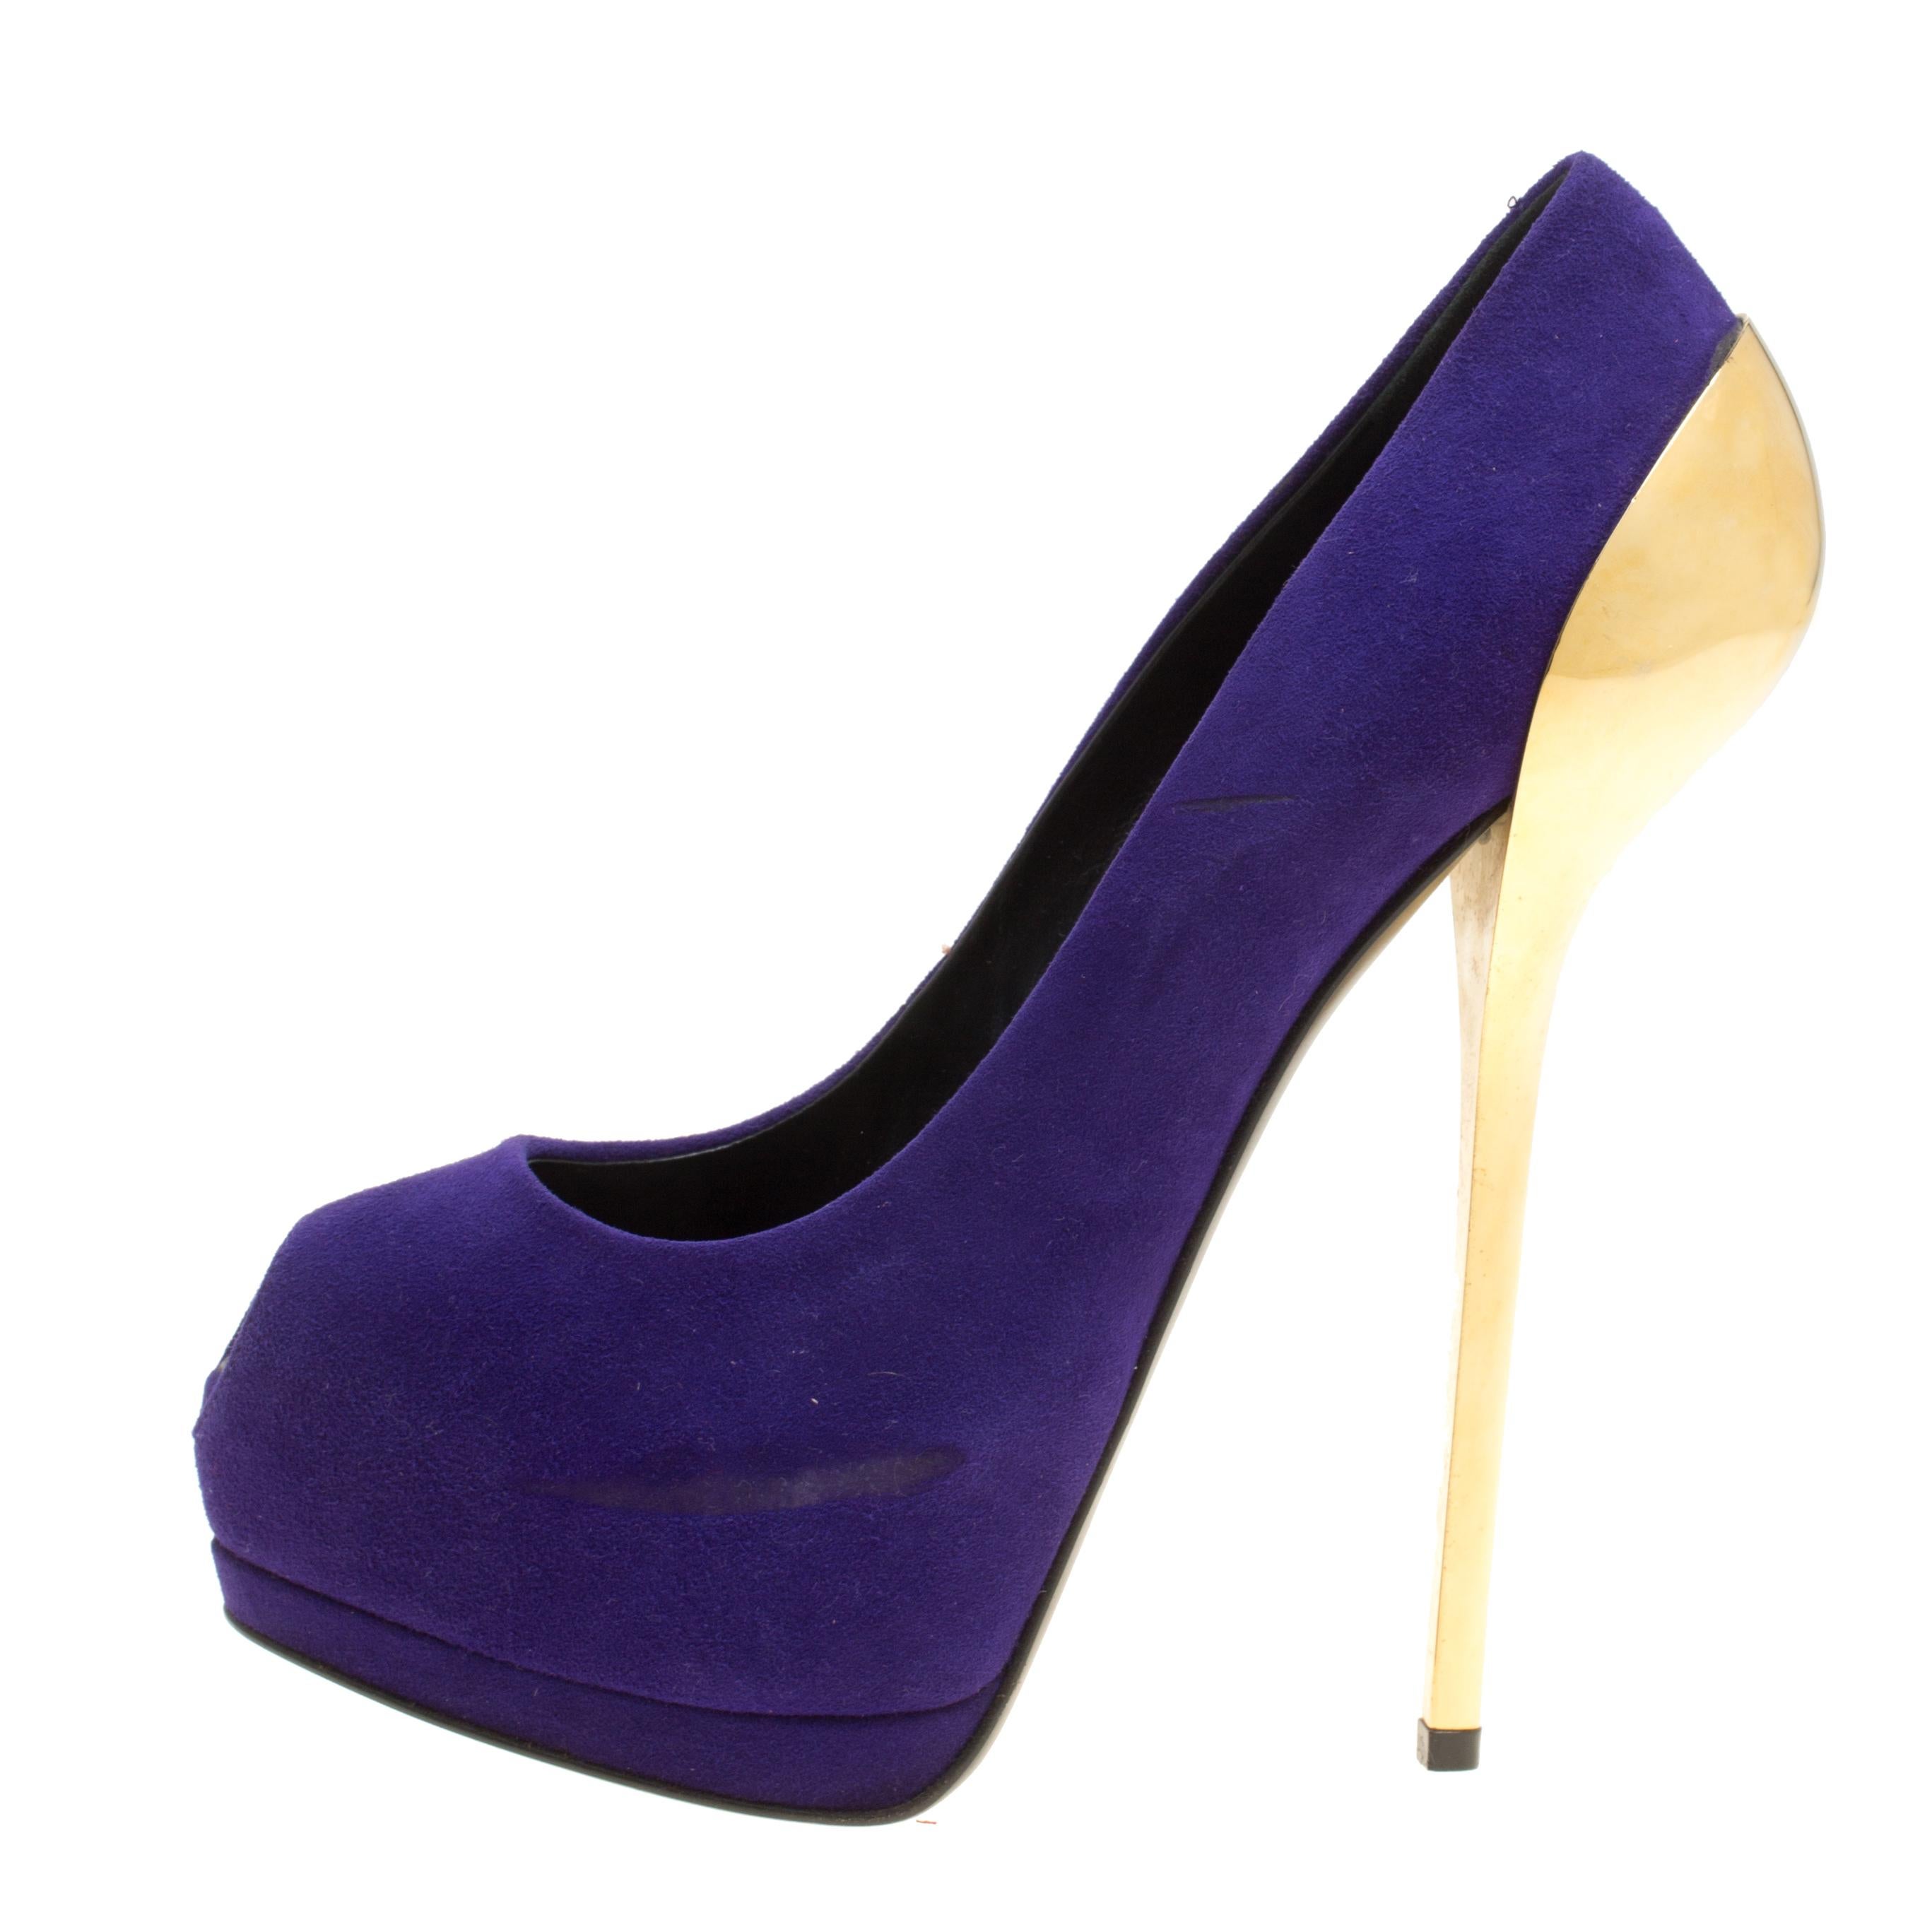 Revamp your footwear collection by adding this pair of Giuseppe Zanotti pumps to it. They are crafted from purple suede and designed with peep toes, platforms and 16.5 cm metal heels that fall from the counters.

